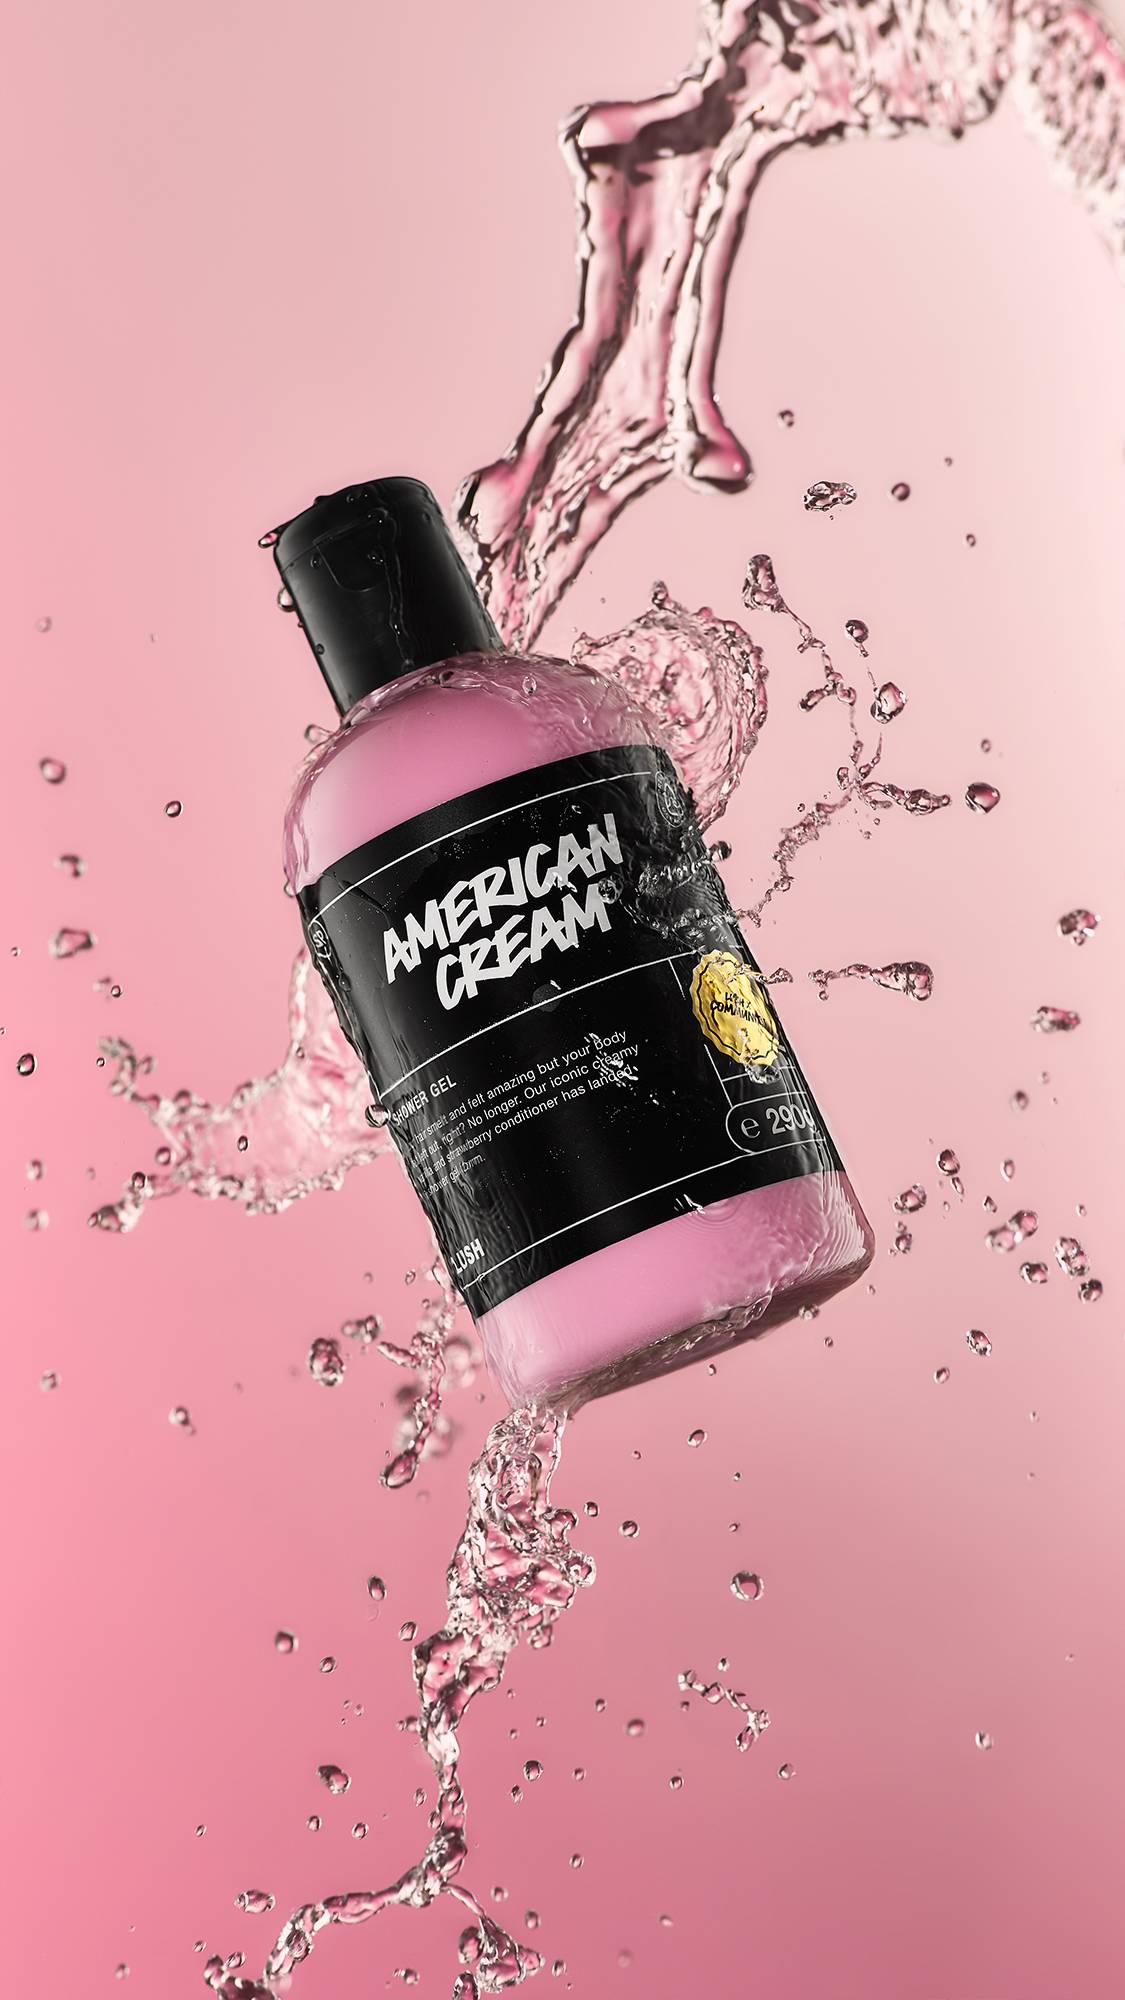 A high-definition action shot of the American Cream shower gel bottle mid-air being splashed by fresh water surrounded by droplets on a candyfloss-pink background. 